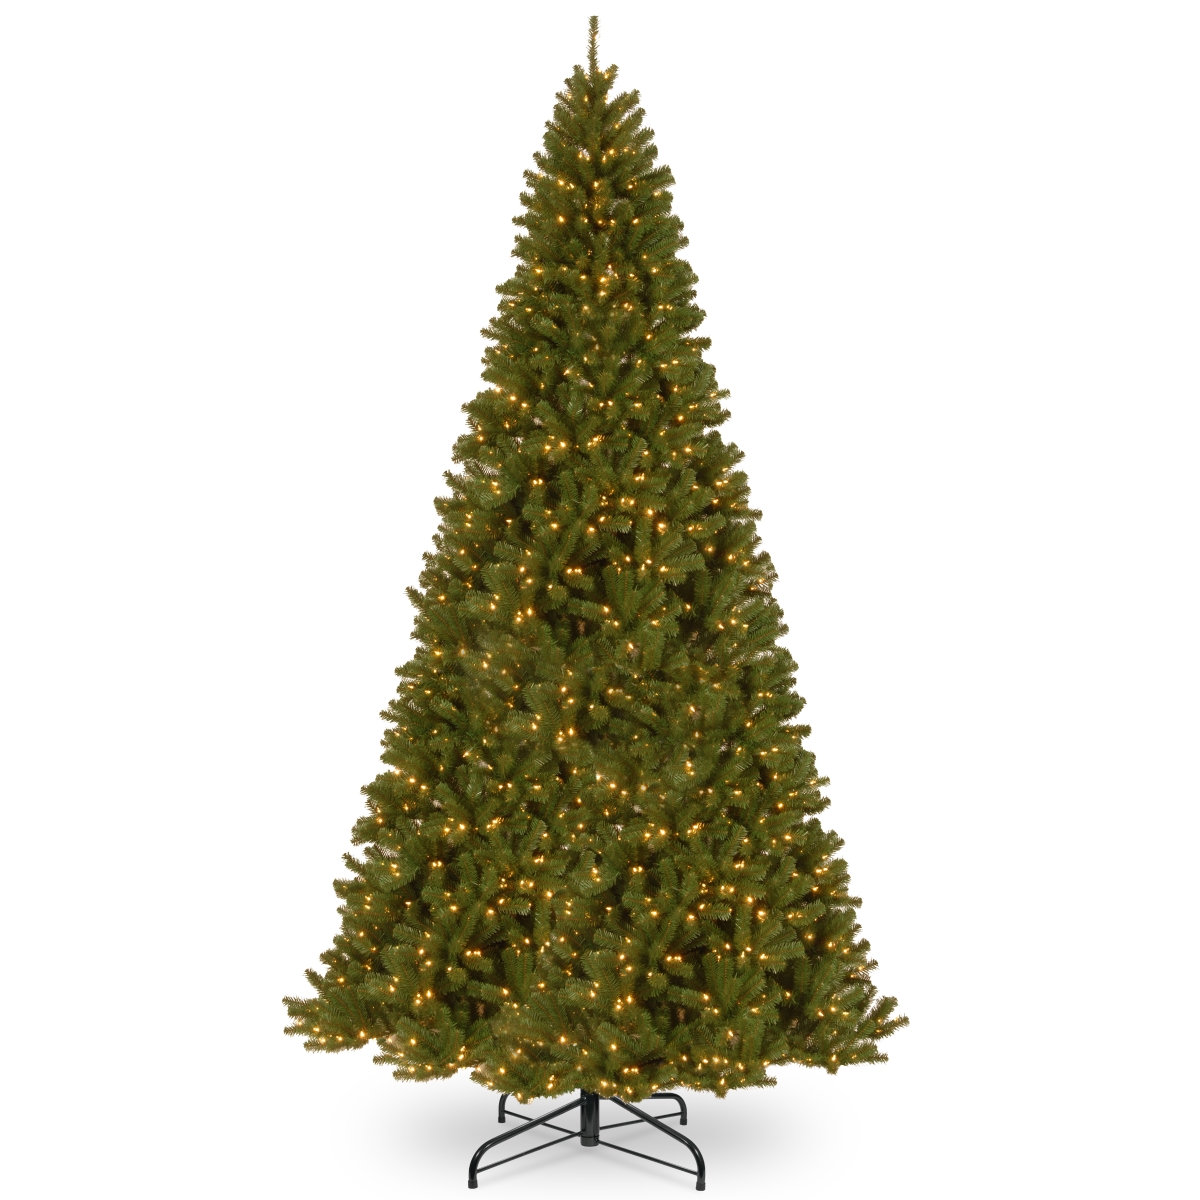 National Tree Nrv7-300-160 16 Ft. North Valley Spruce Tree With 2000 Clear Lights